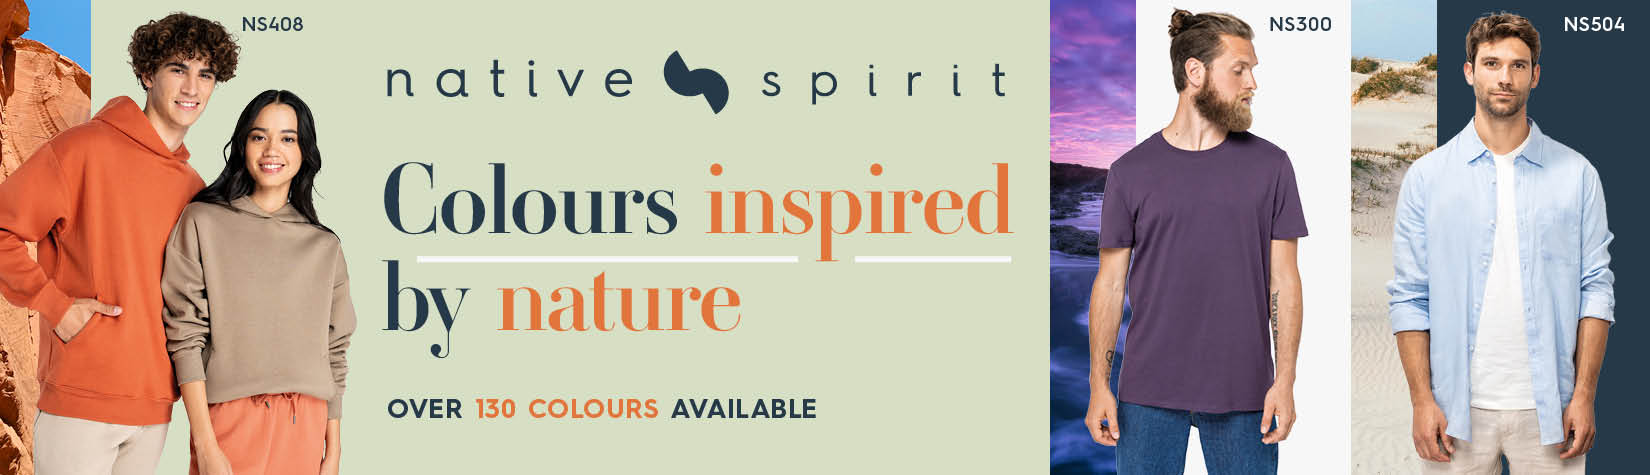 Native Spirit, inspired by nature